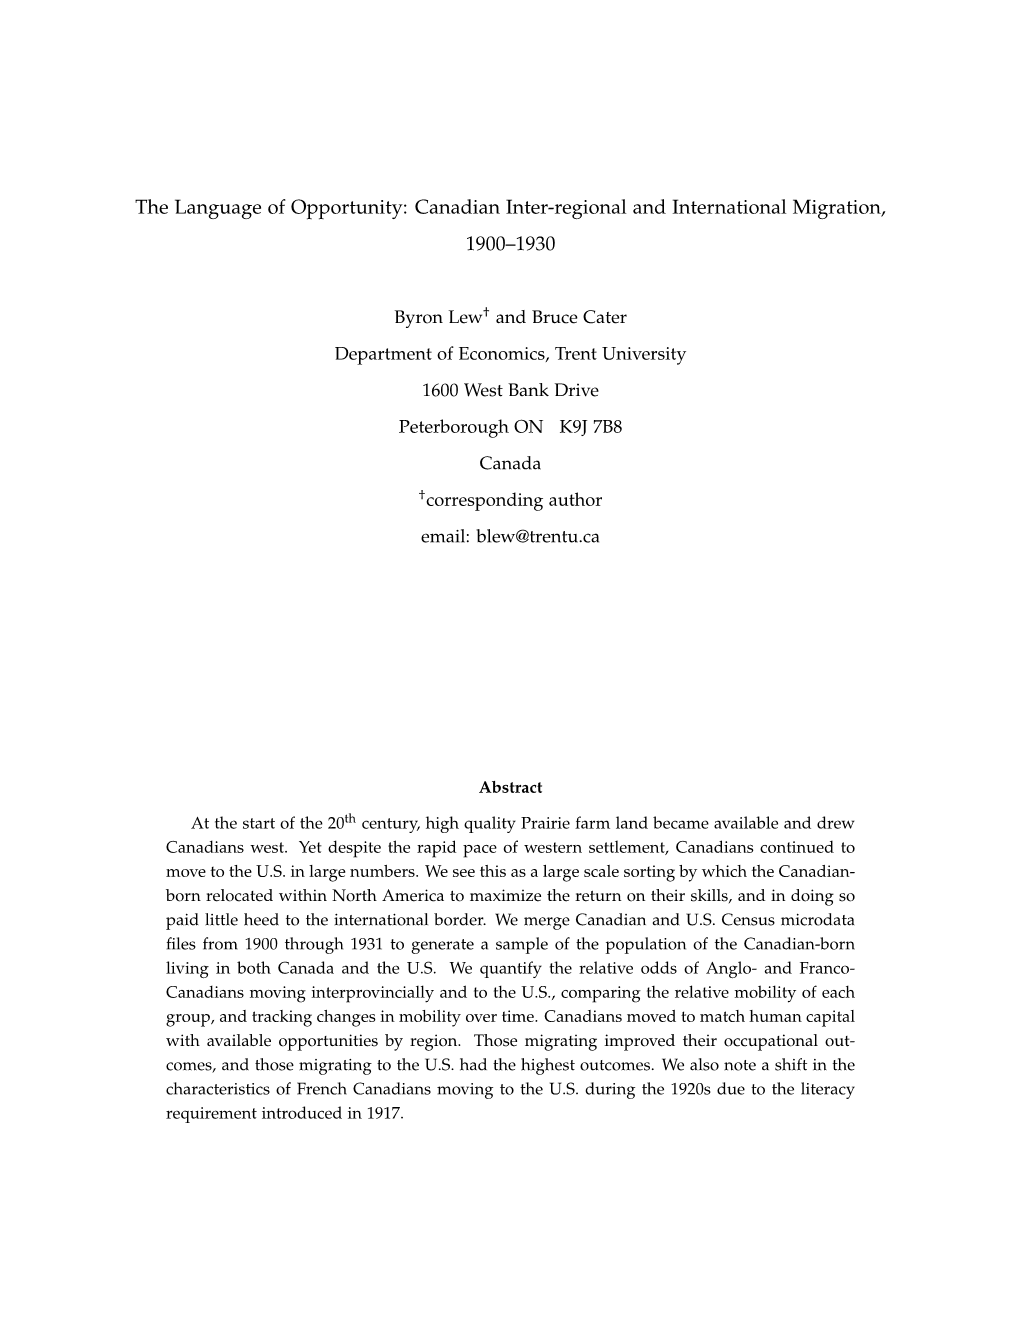 The Language of Opportunity: Canadian Inter-Regional and International Migration, 1900–1930